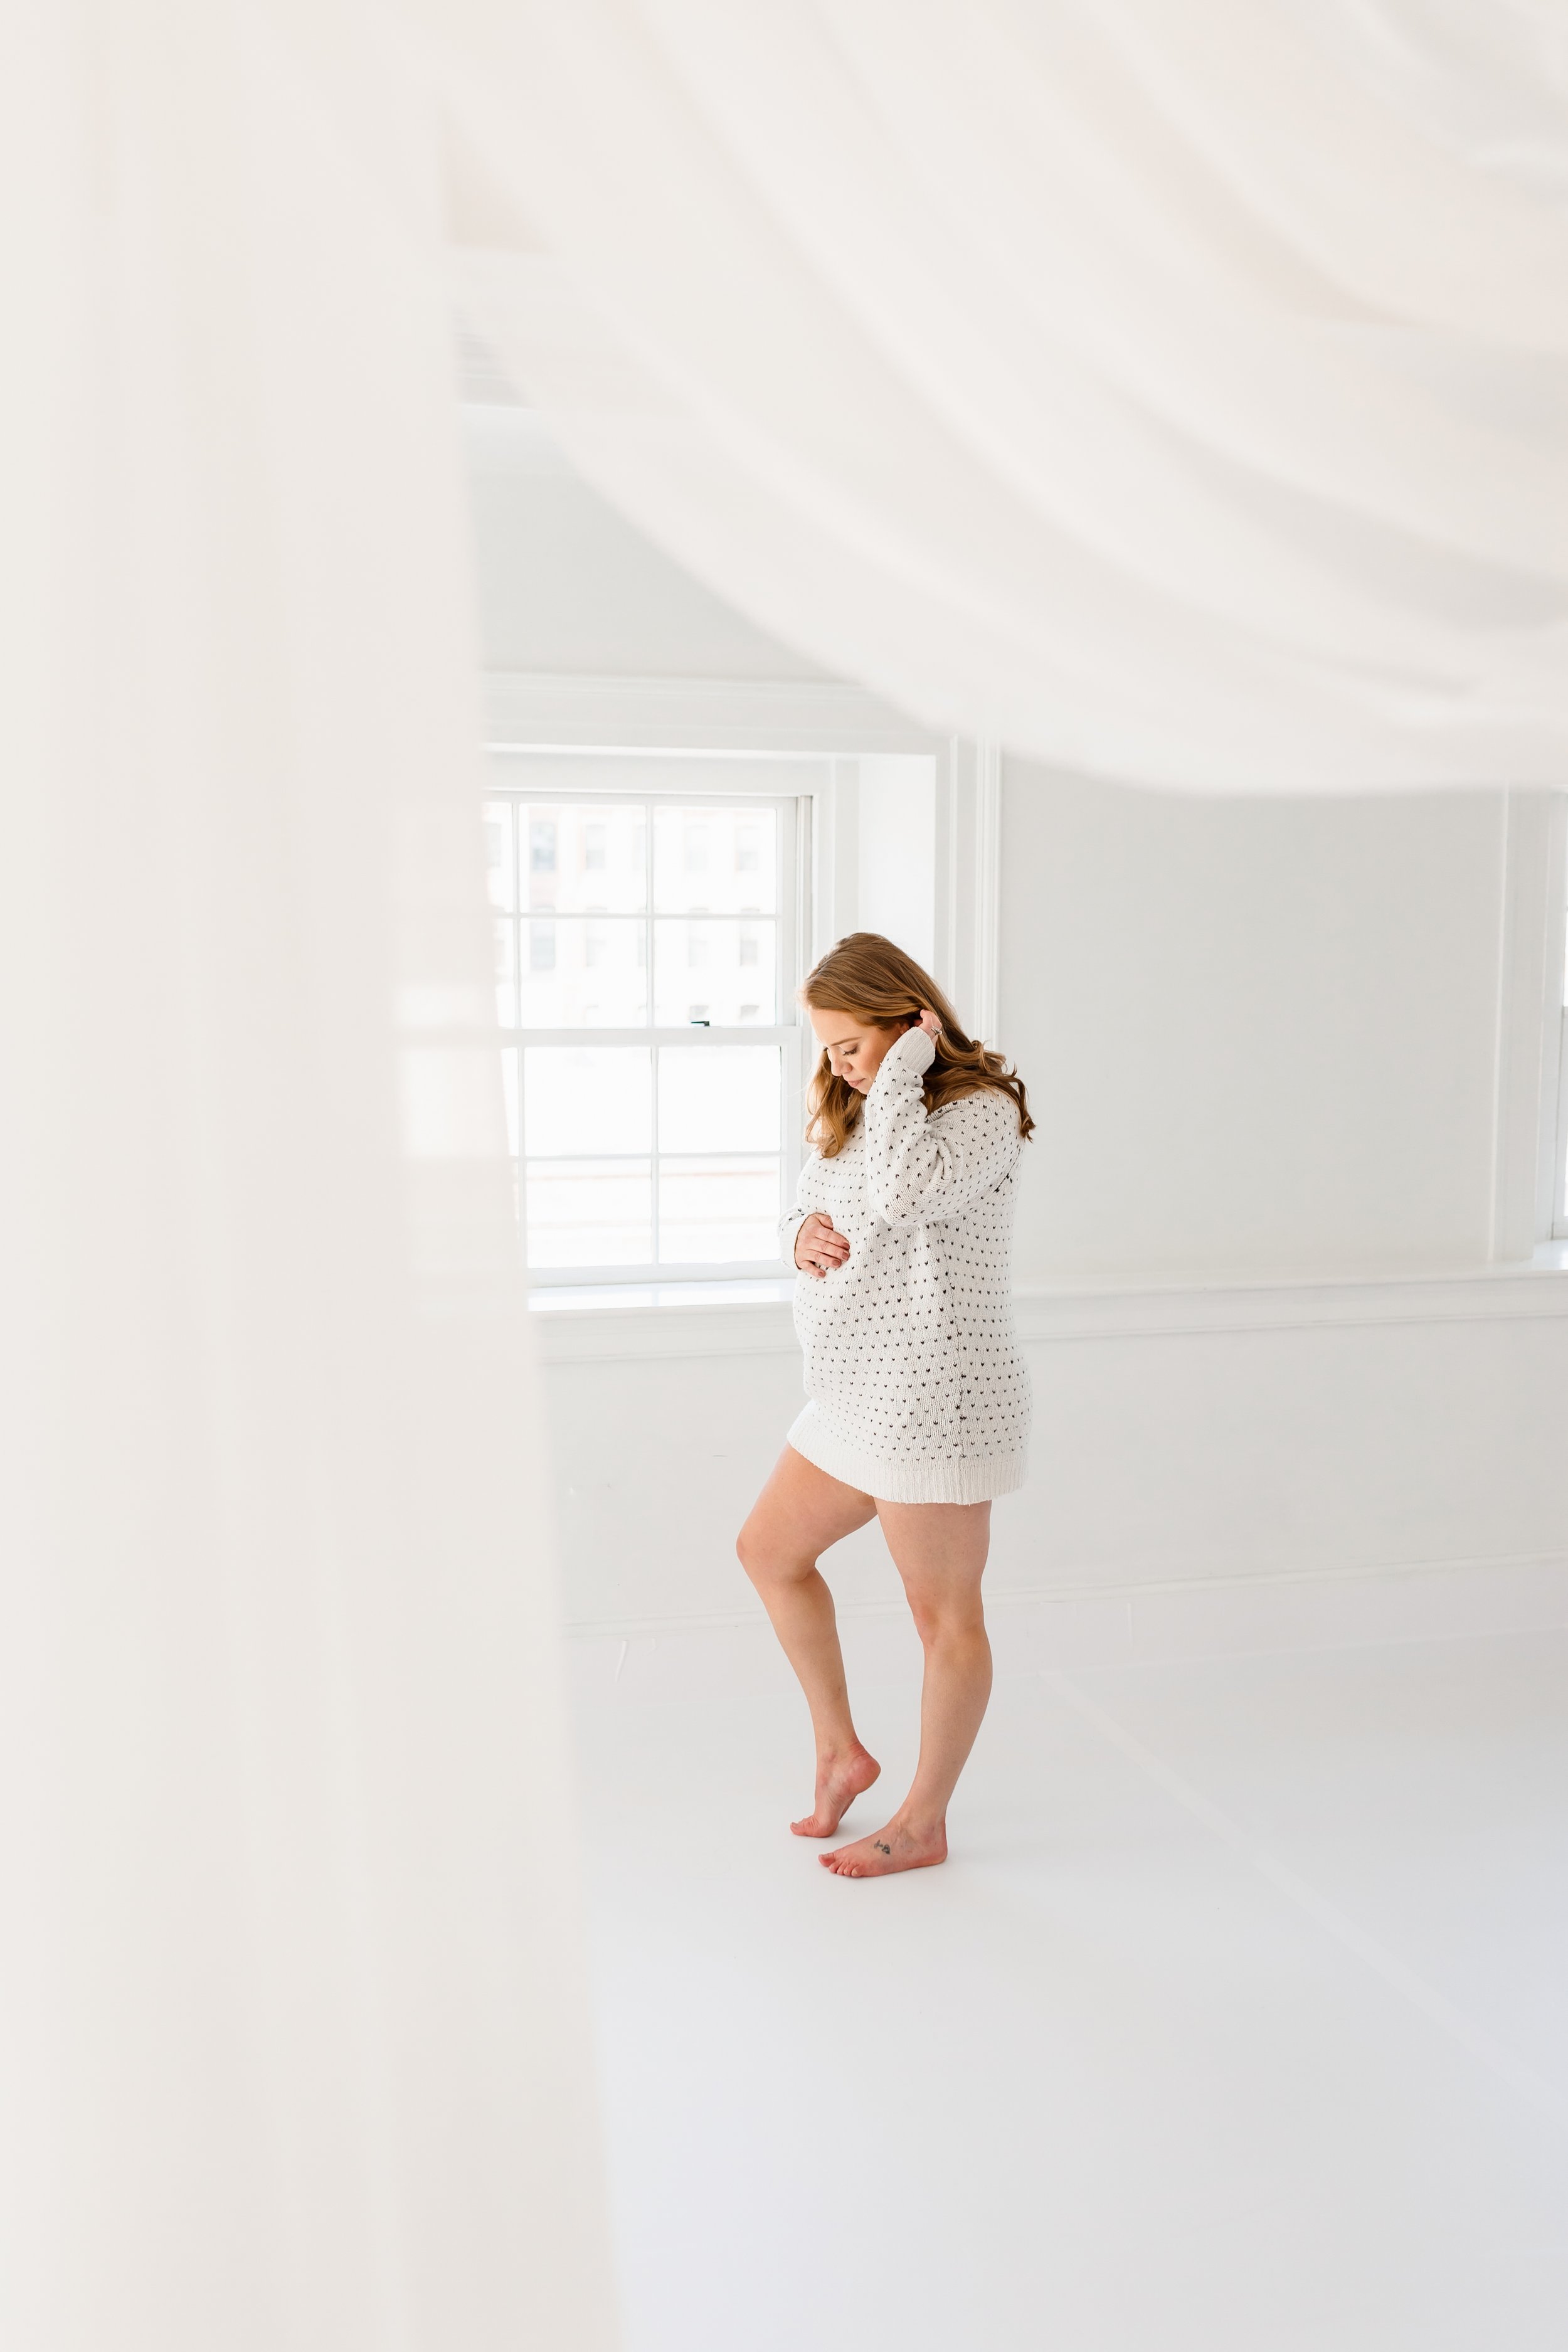 Kelly Anne Photography NH Lifestyle Photographer Studio Maternity Family Session Final Gallery-50.jpg